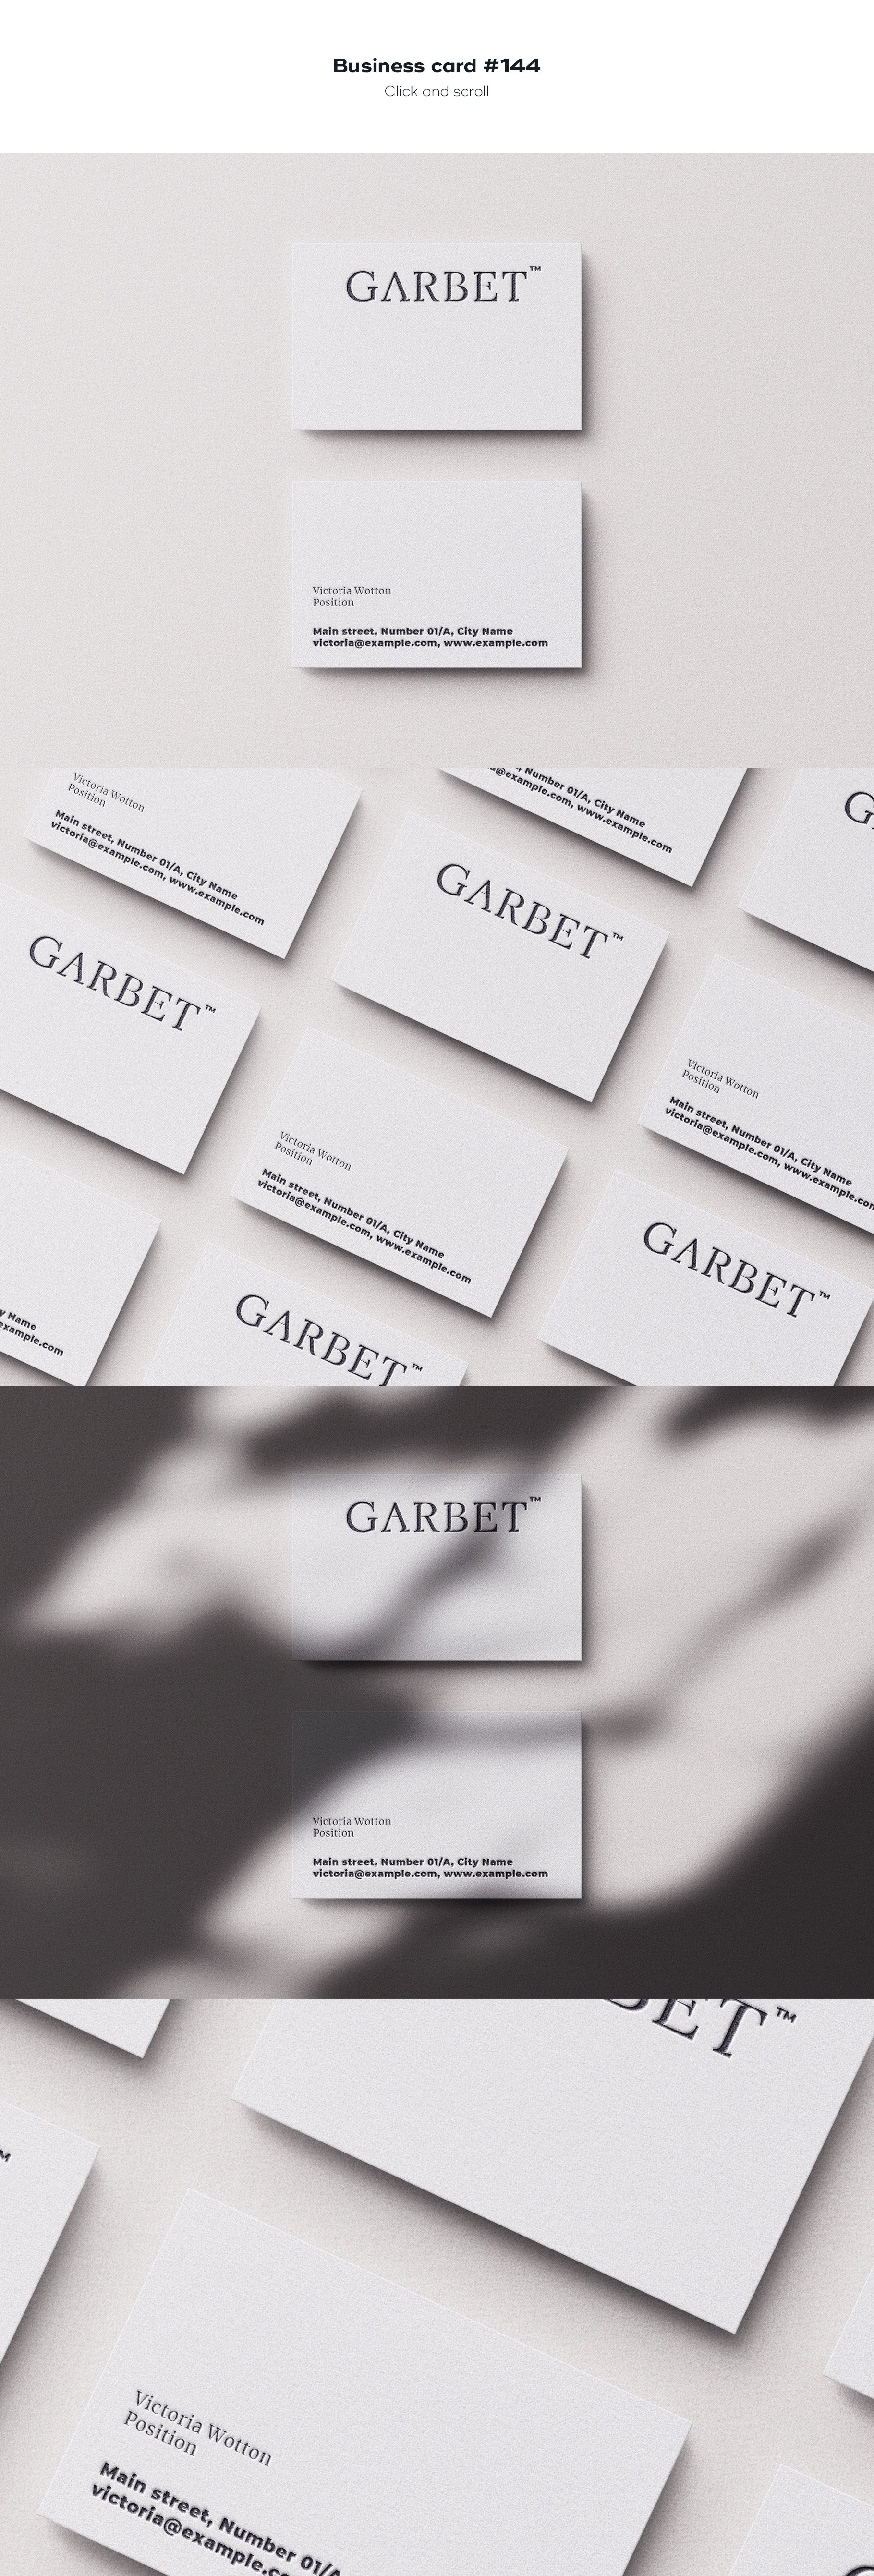 business card 144 730